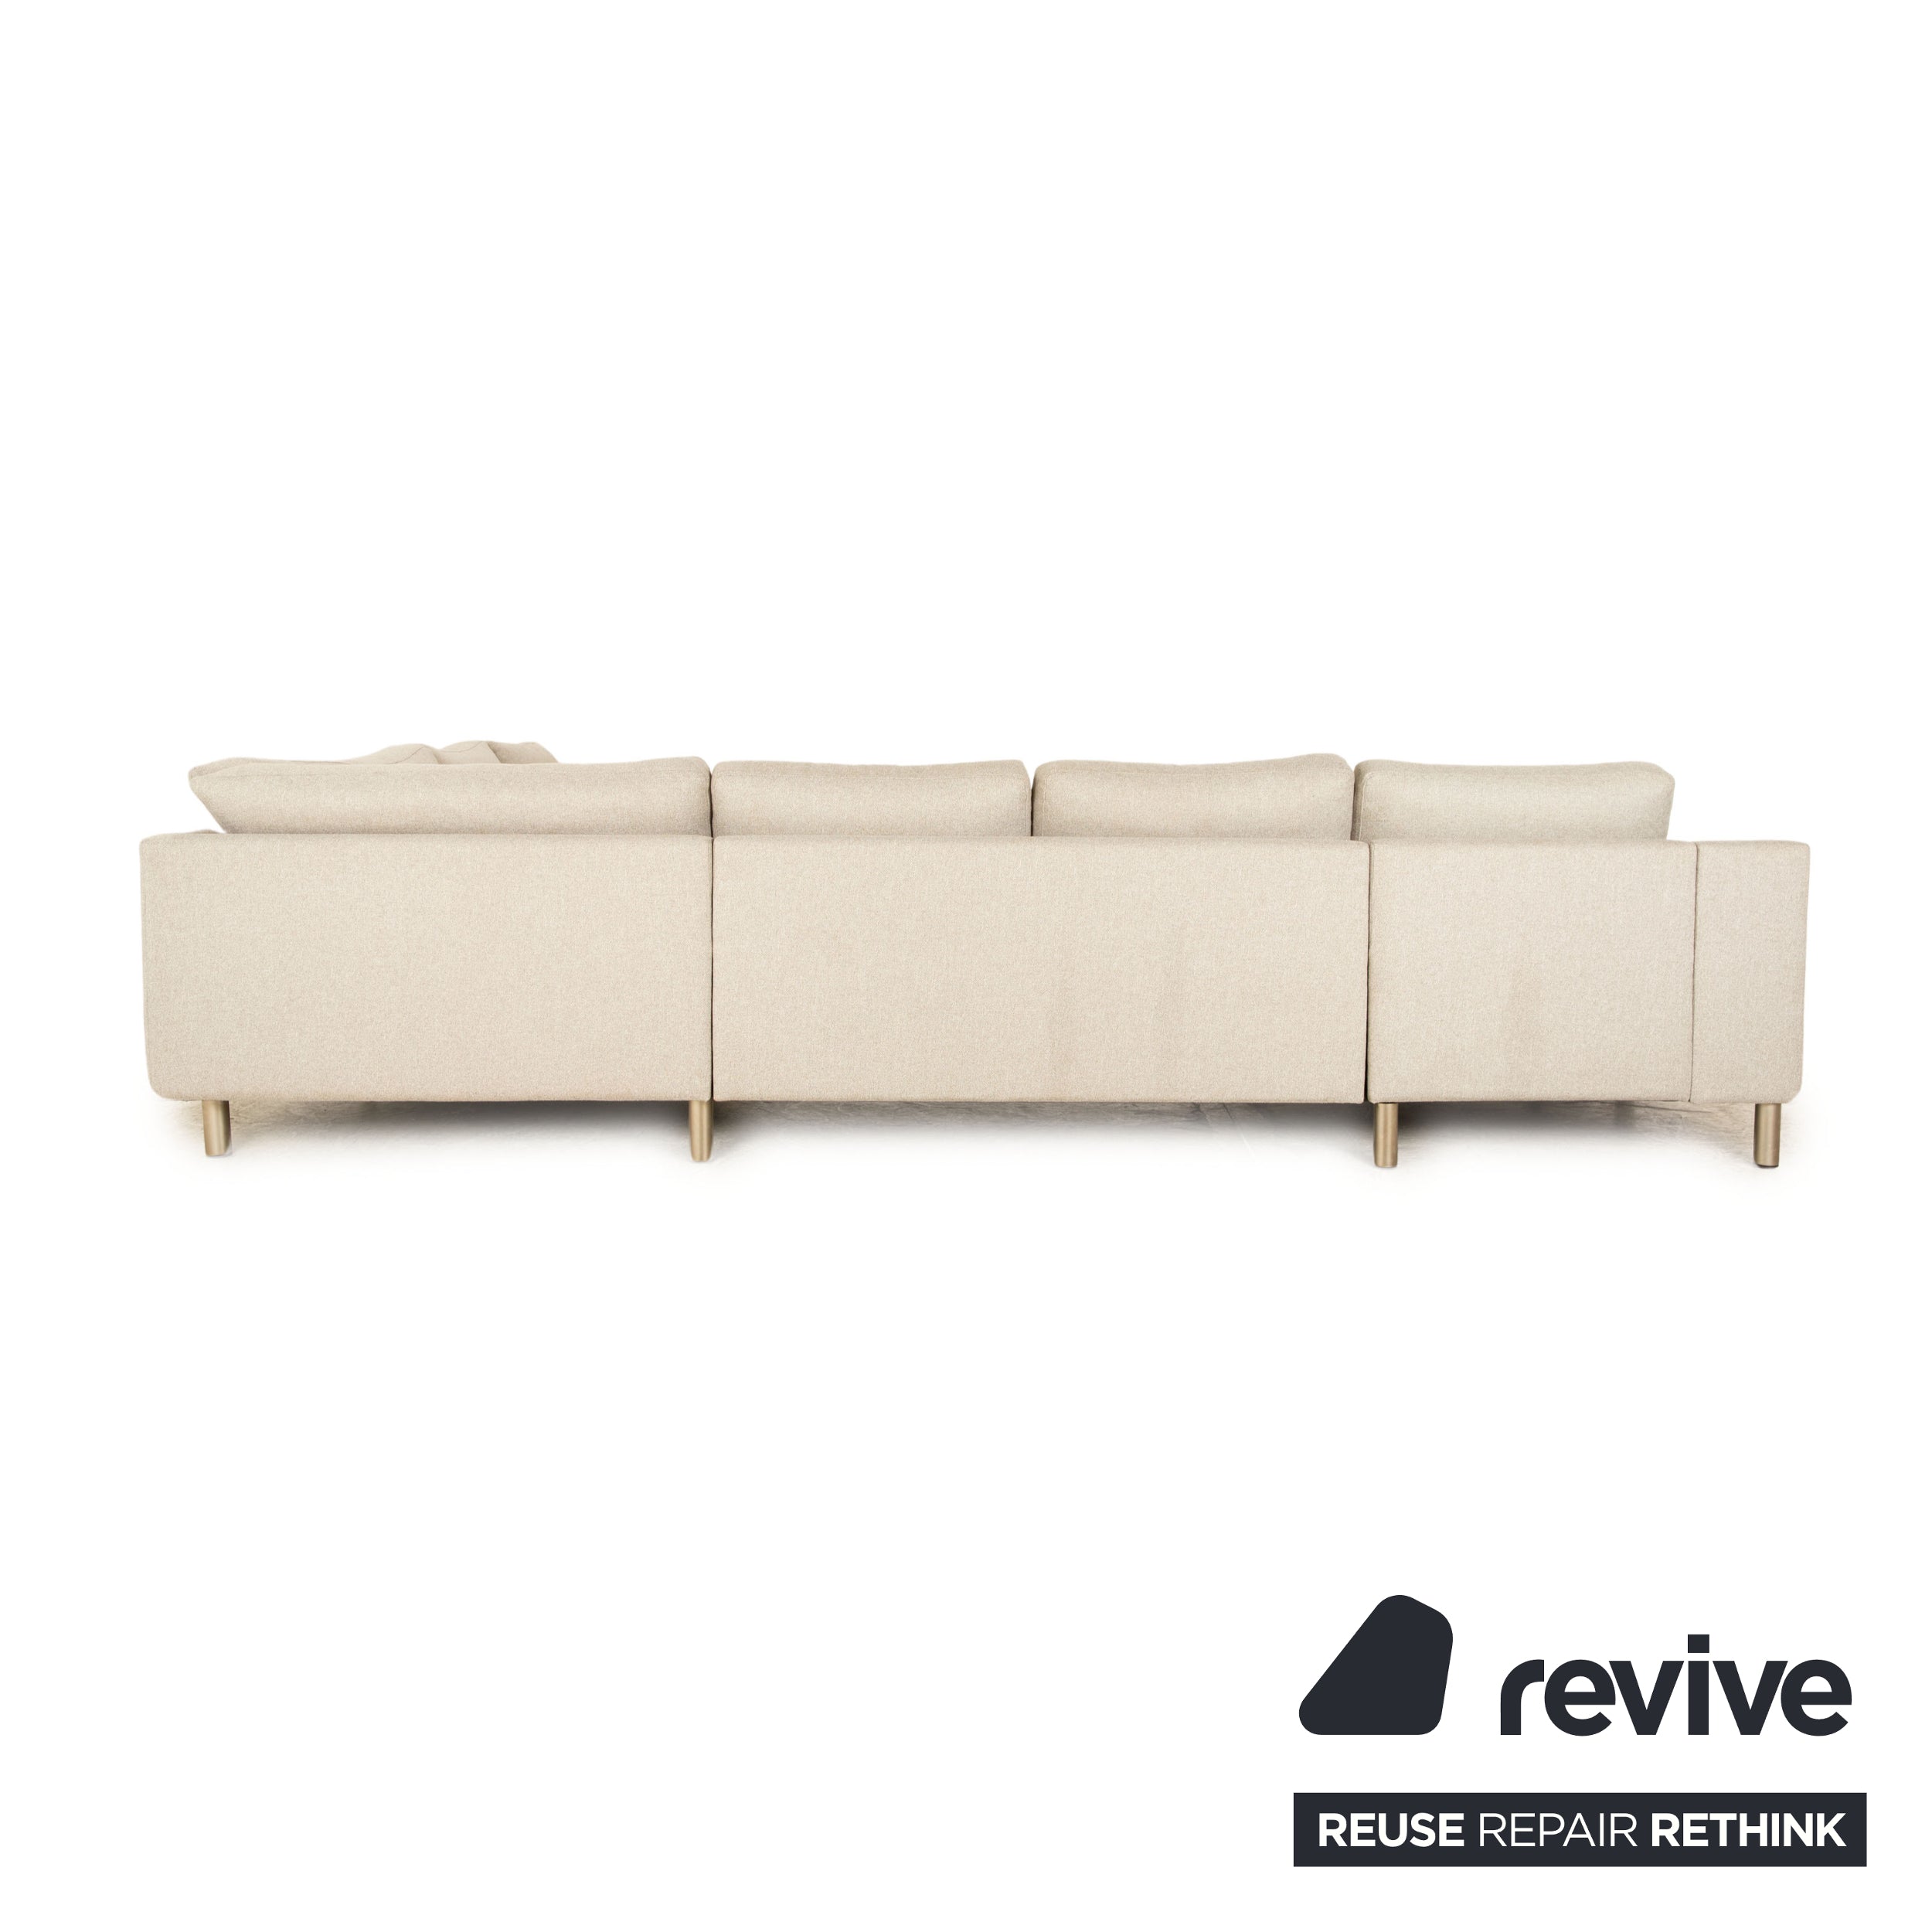 Who's Perfect Stoff Ecksofa Grau Recamiere Links manuelle Funktion Sofa Couch